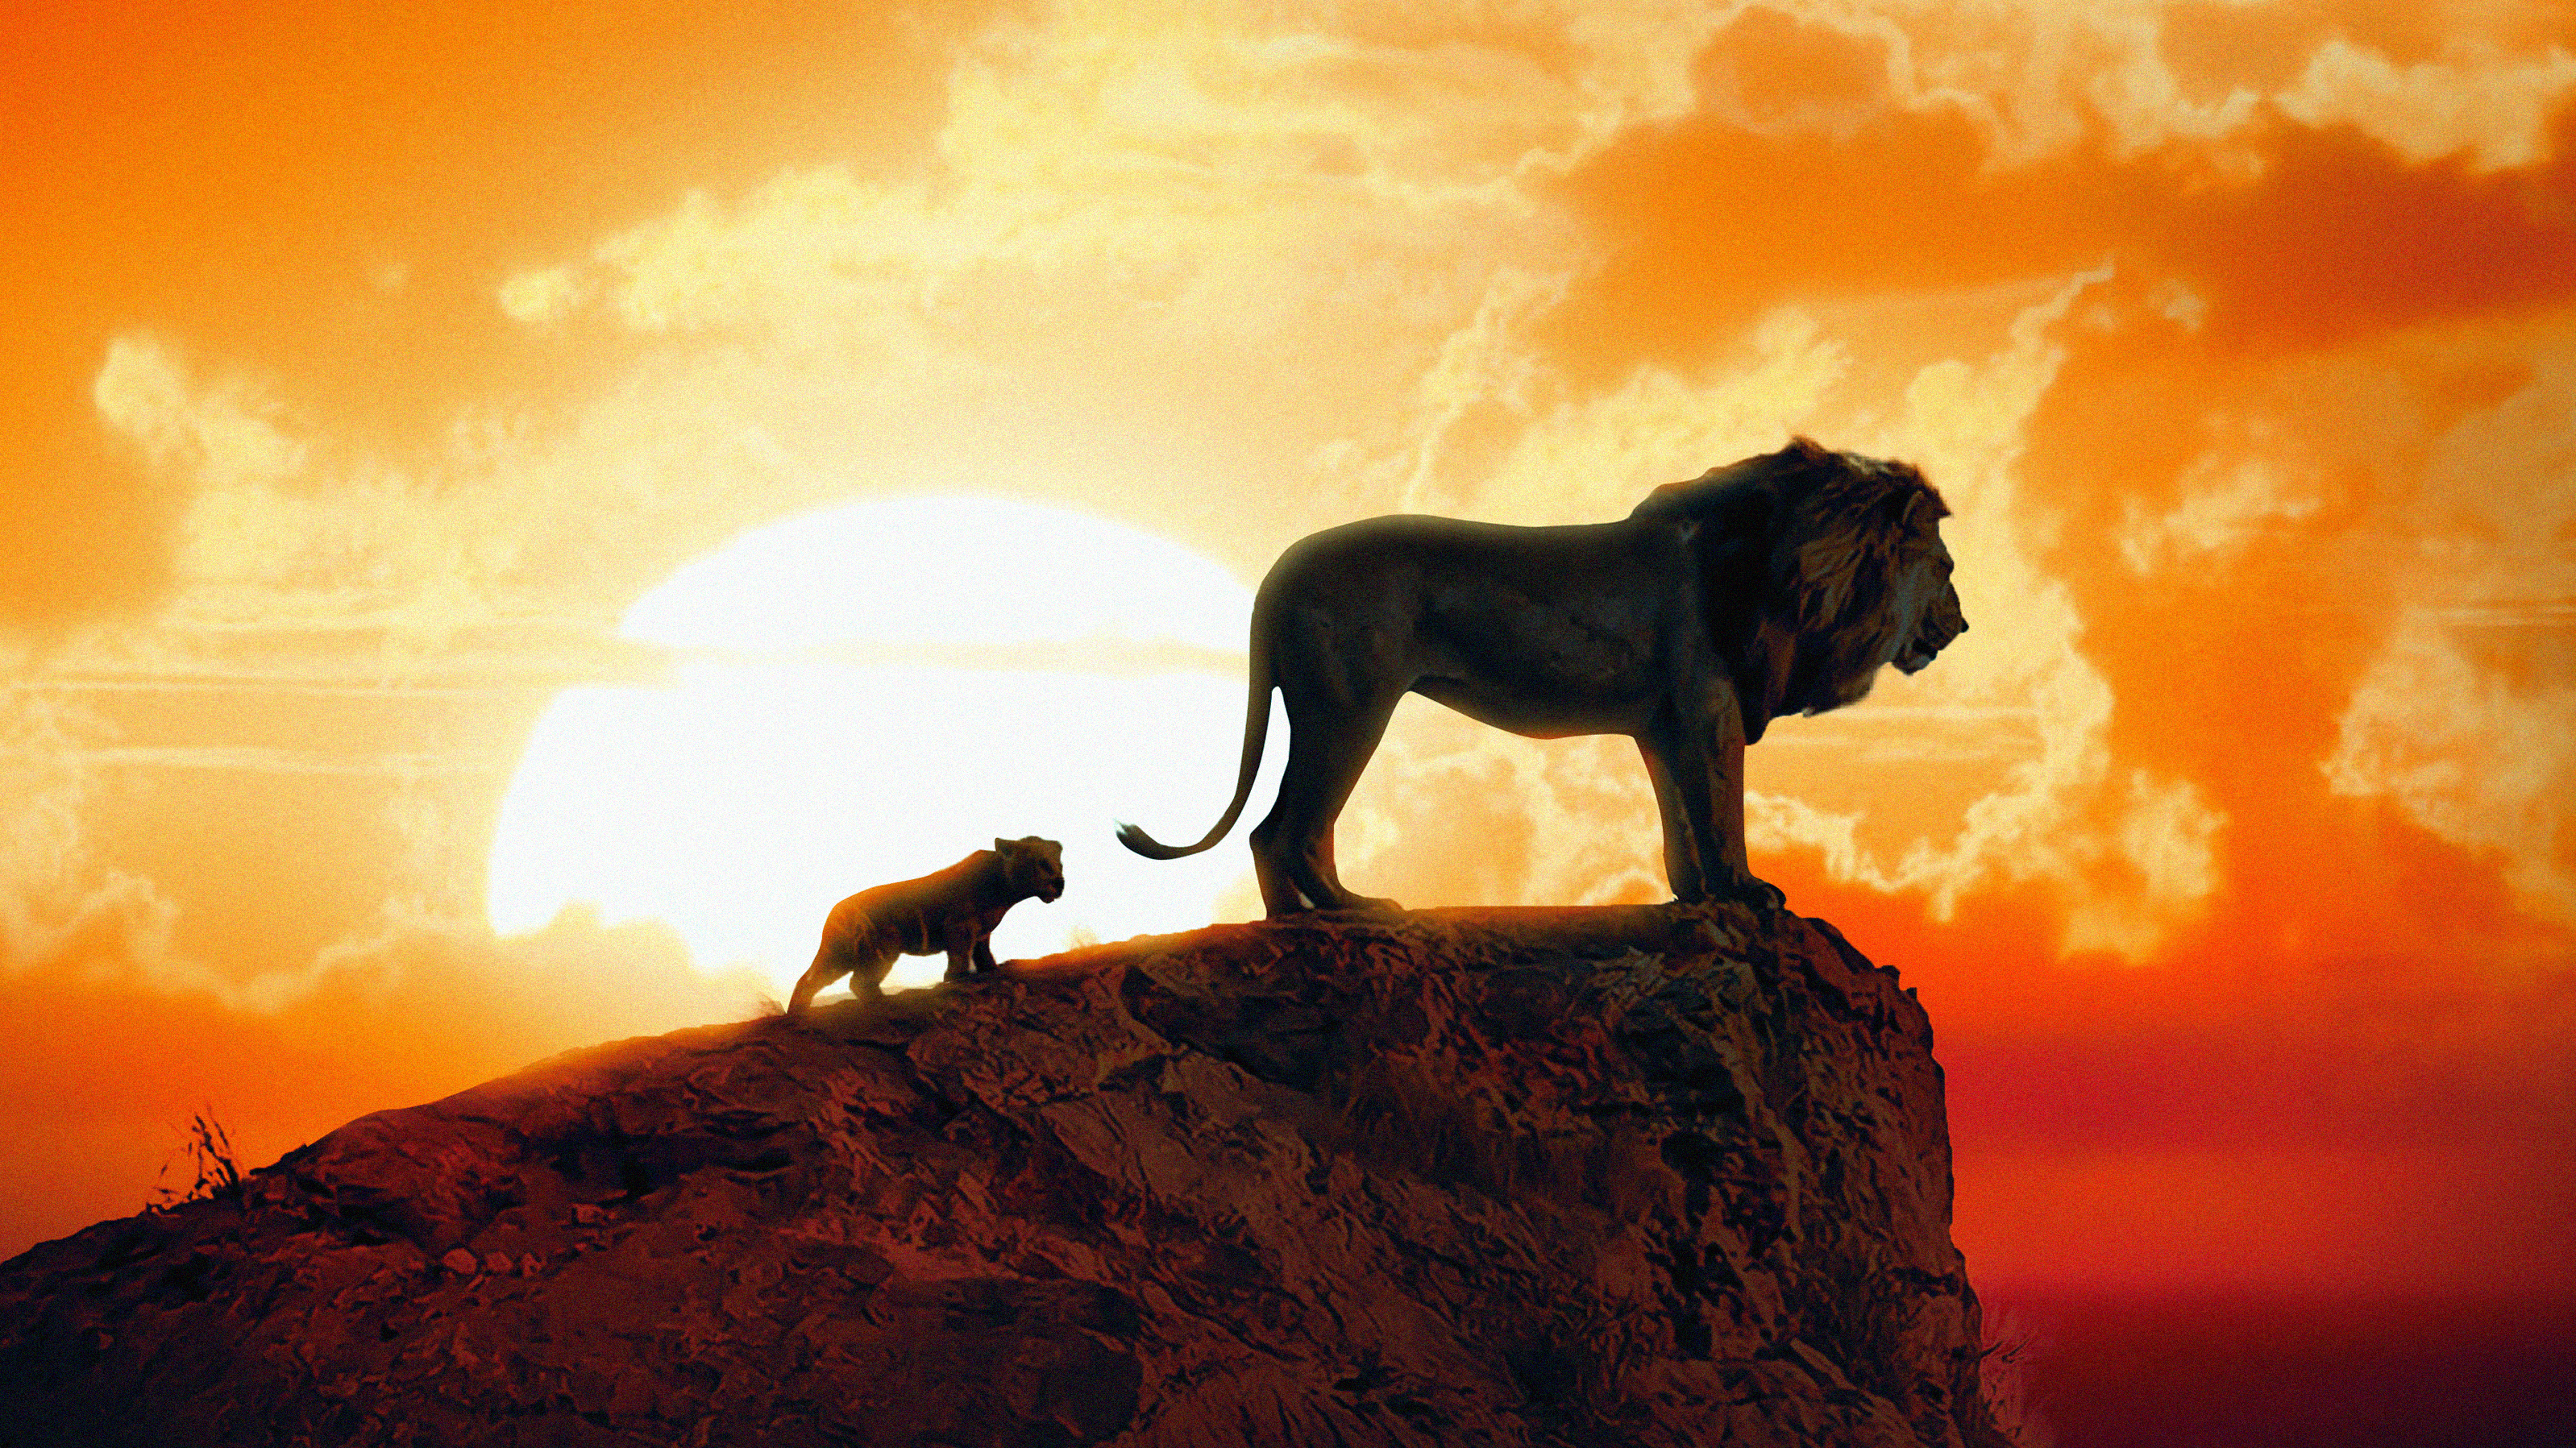 Poster Of The Lion King Wallpapers